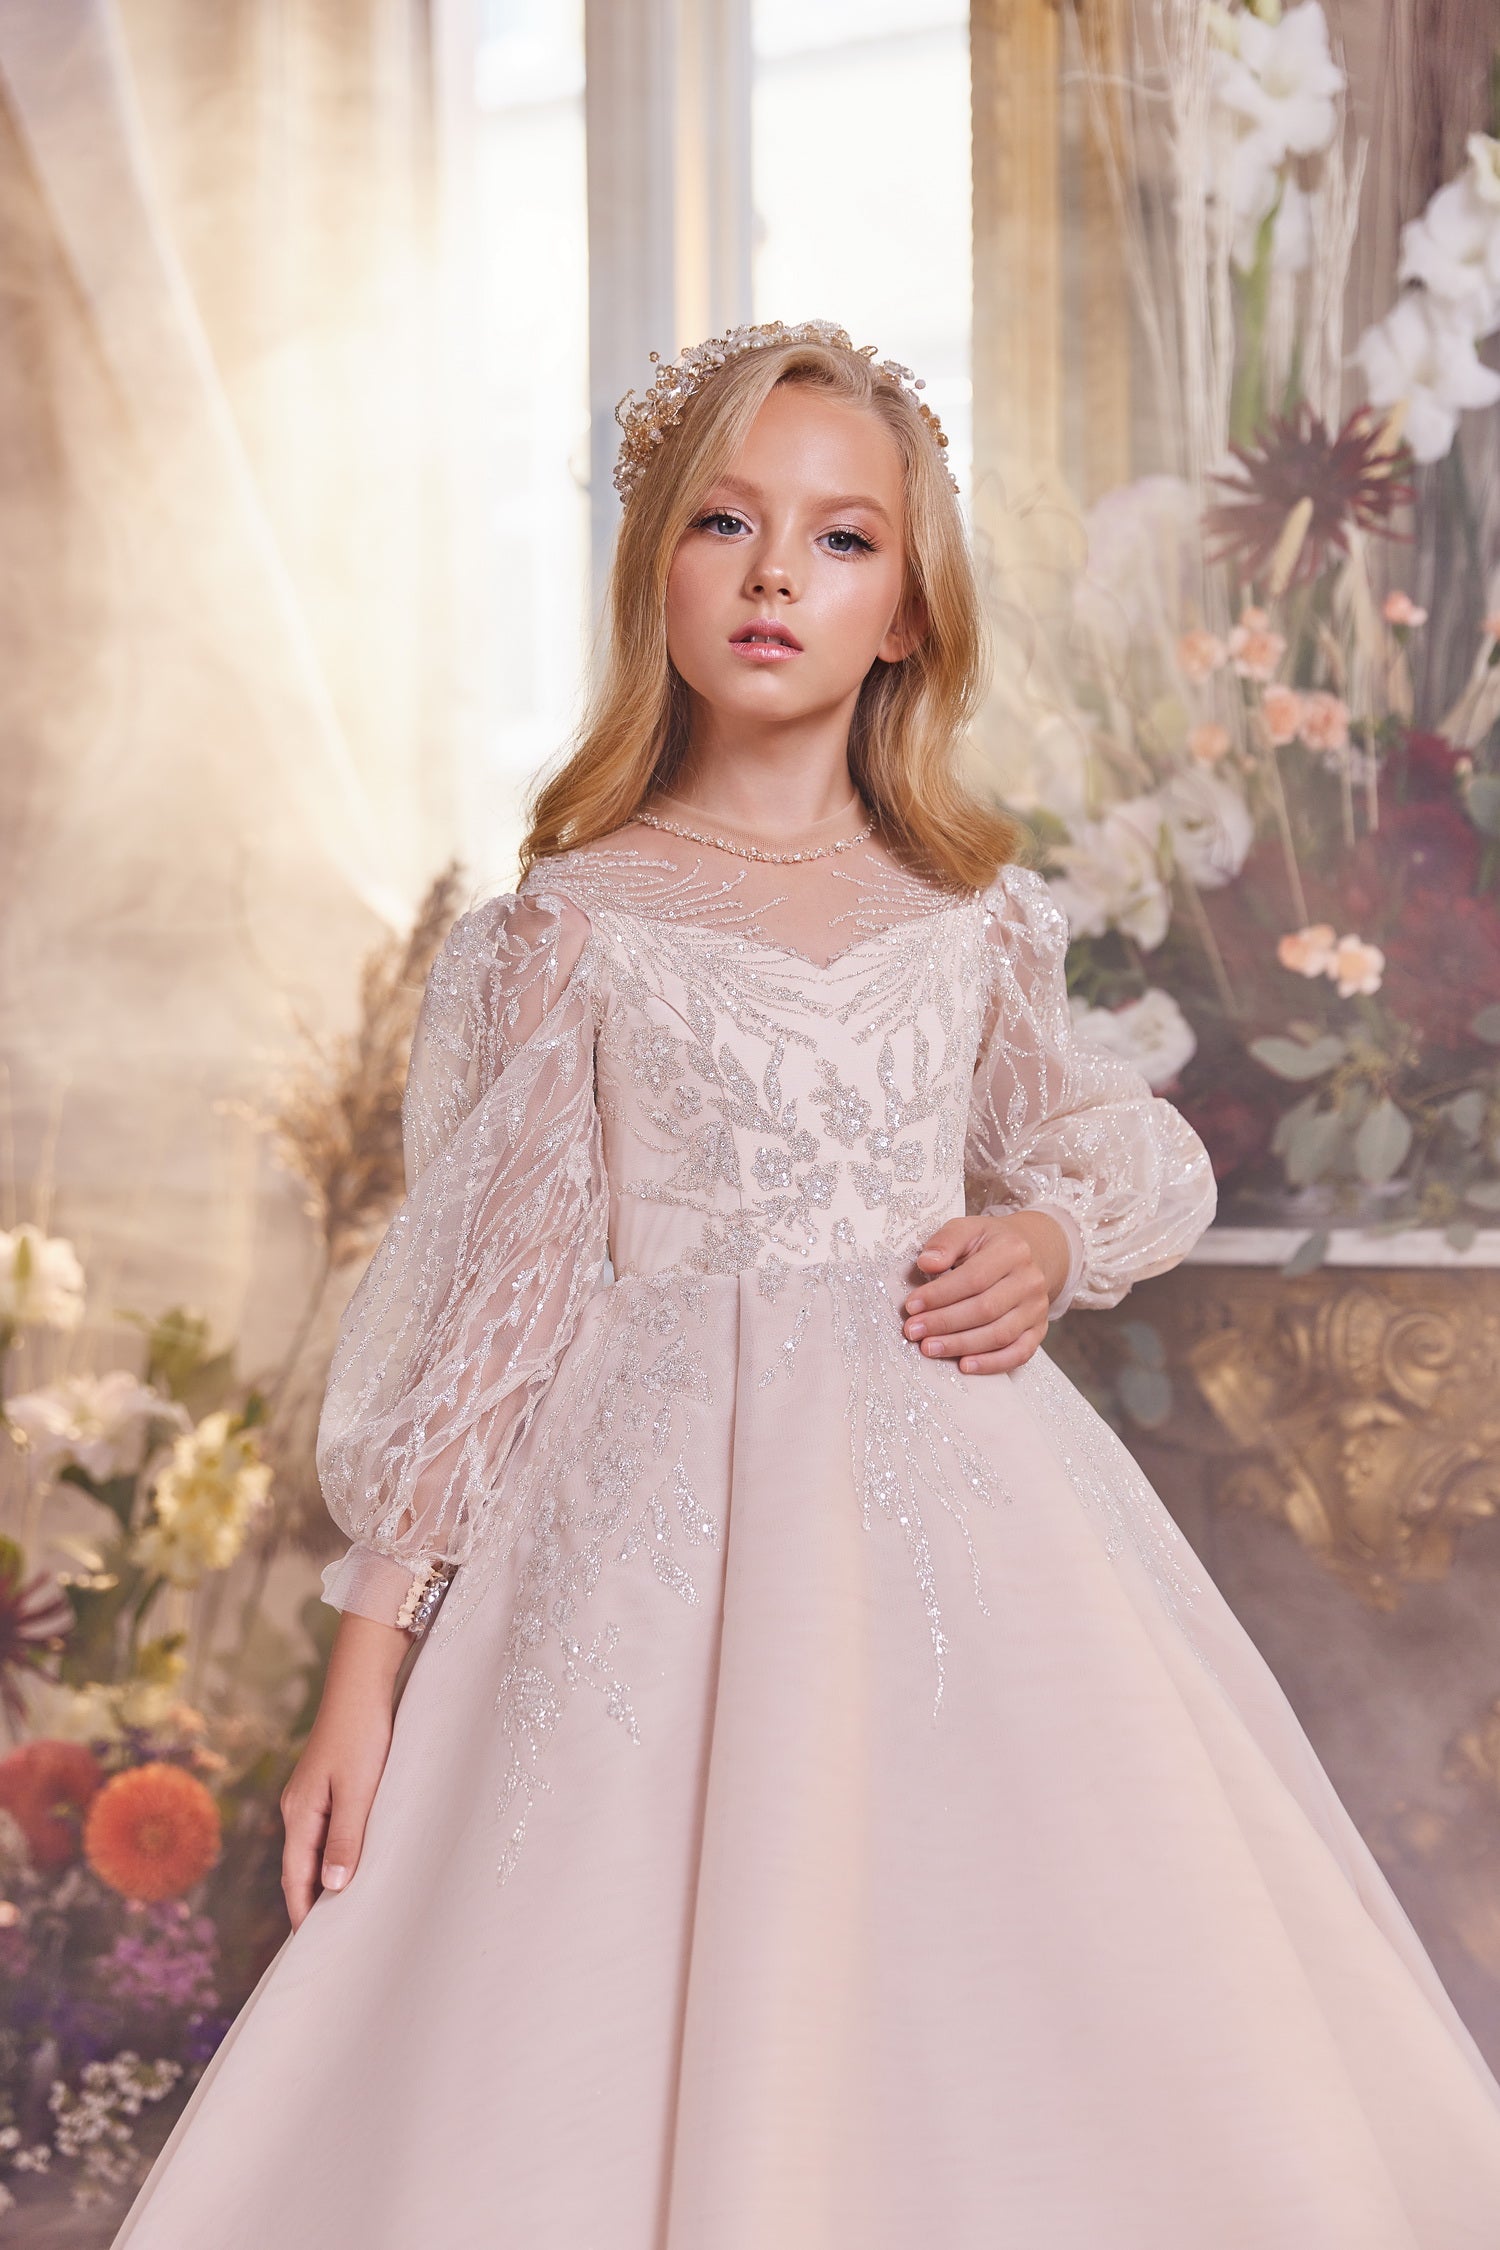 Girls Dress By Pentelei Couture Classic Special Occasion Wedding Party Dress